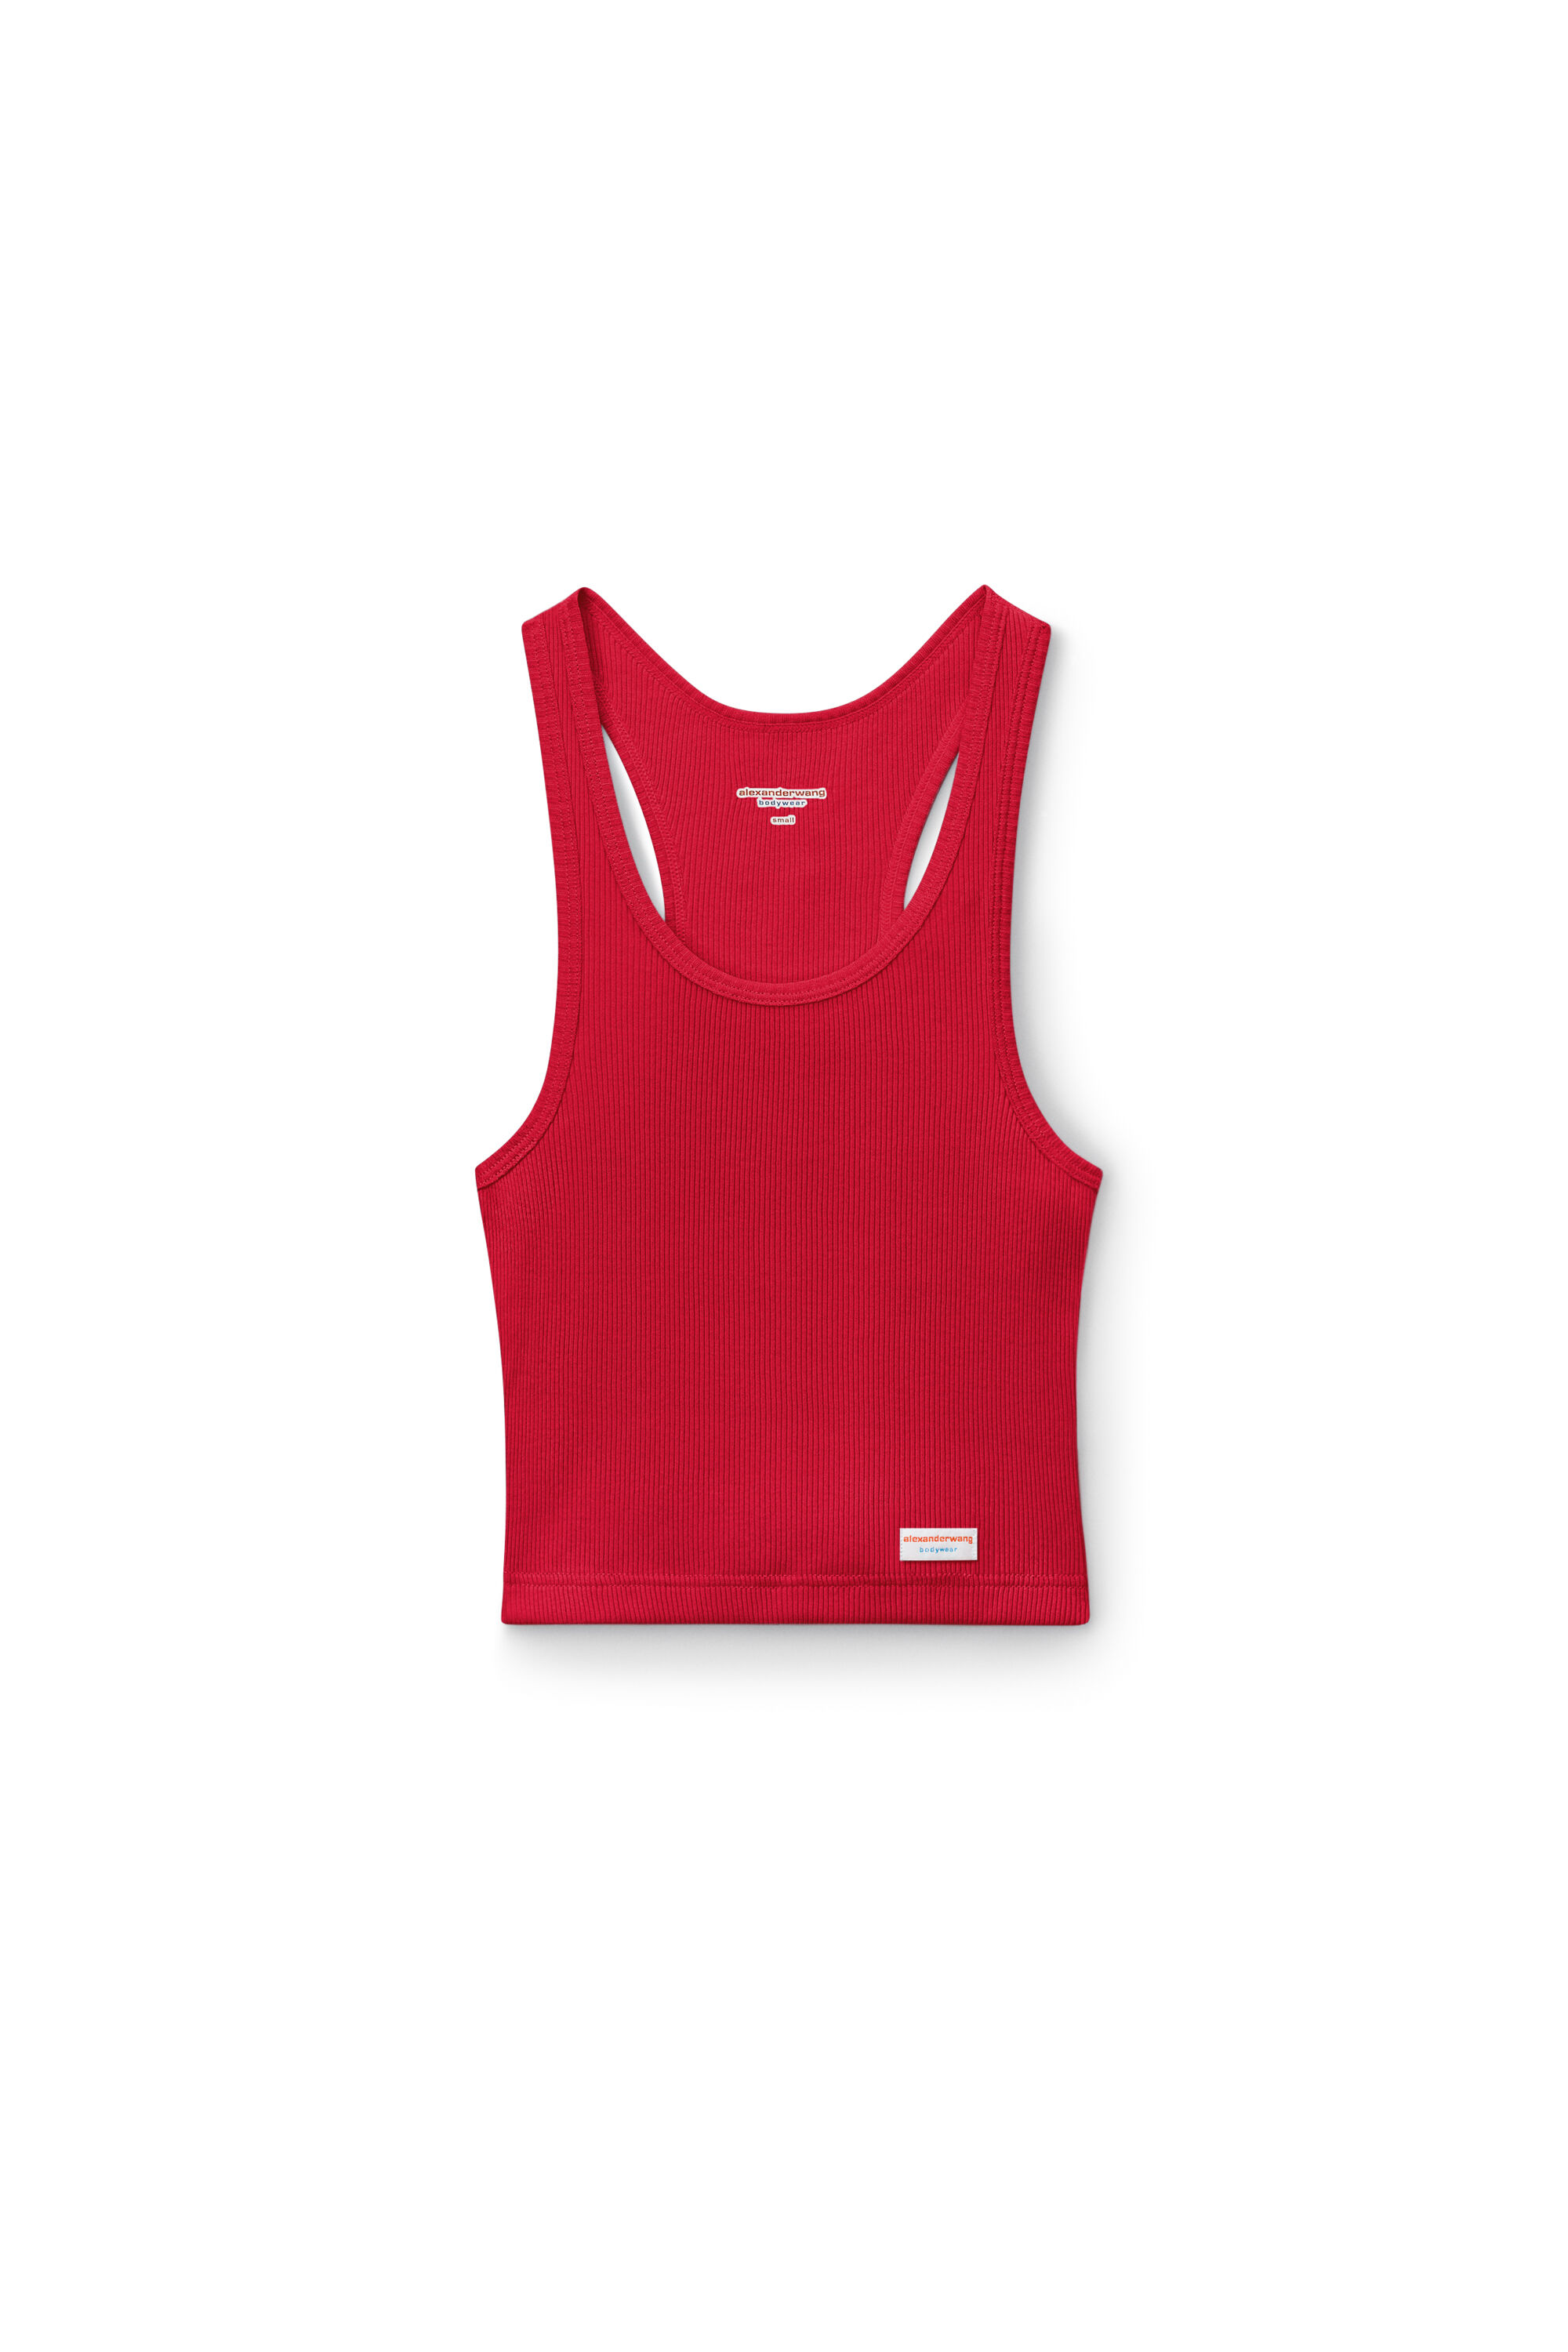 alexanderwang Cropped Racerback Tank in Ribbed Cotton Jersey 